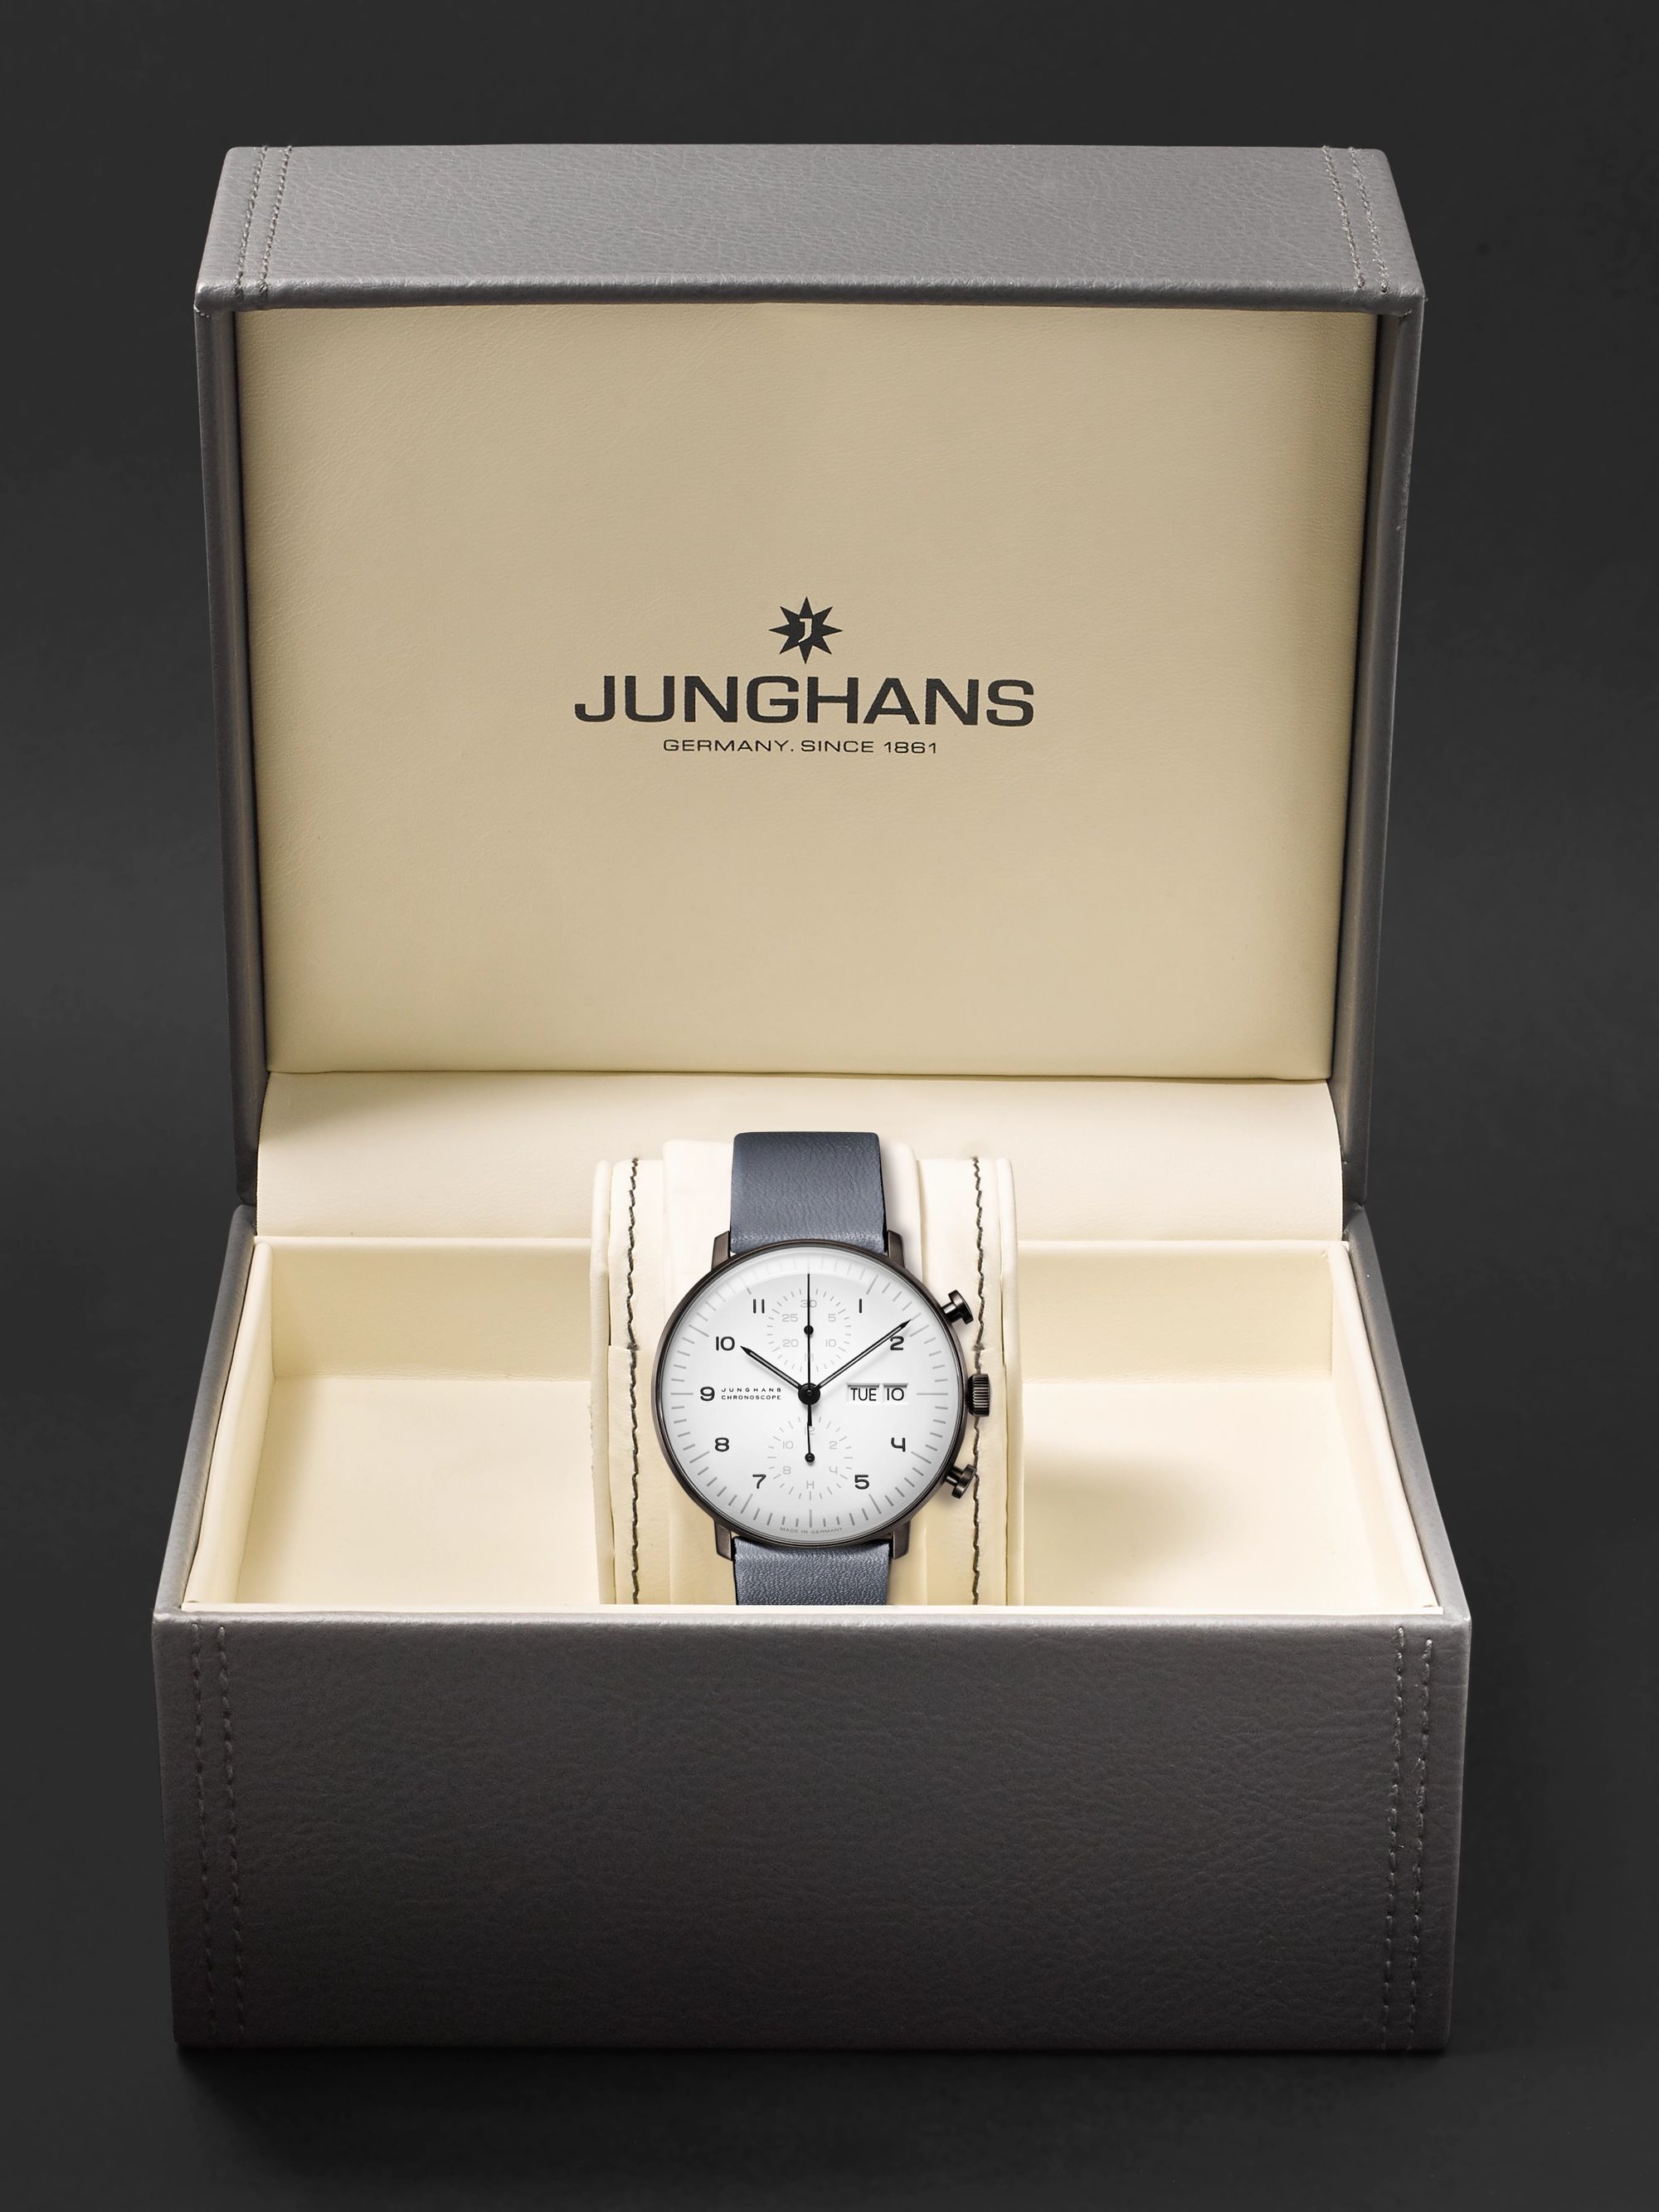 JUNGHANS Max Bill Chronoscope Automatic 40mm Stainless Steel and Leather Watch, Ref. No. 027/4008.05